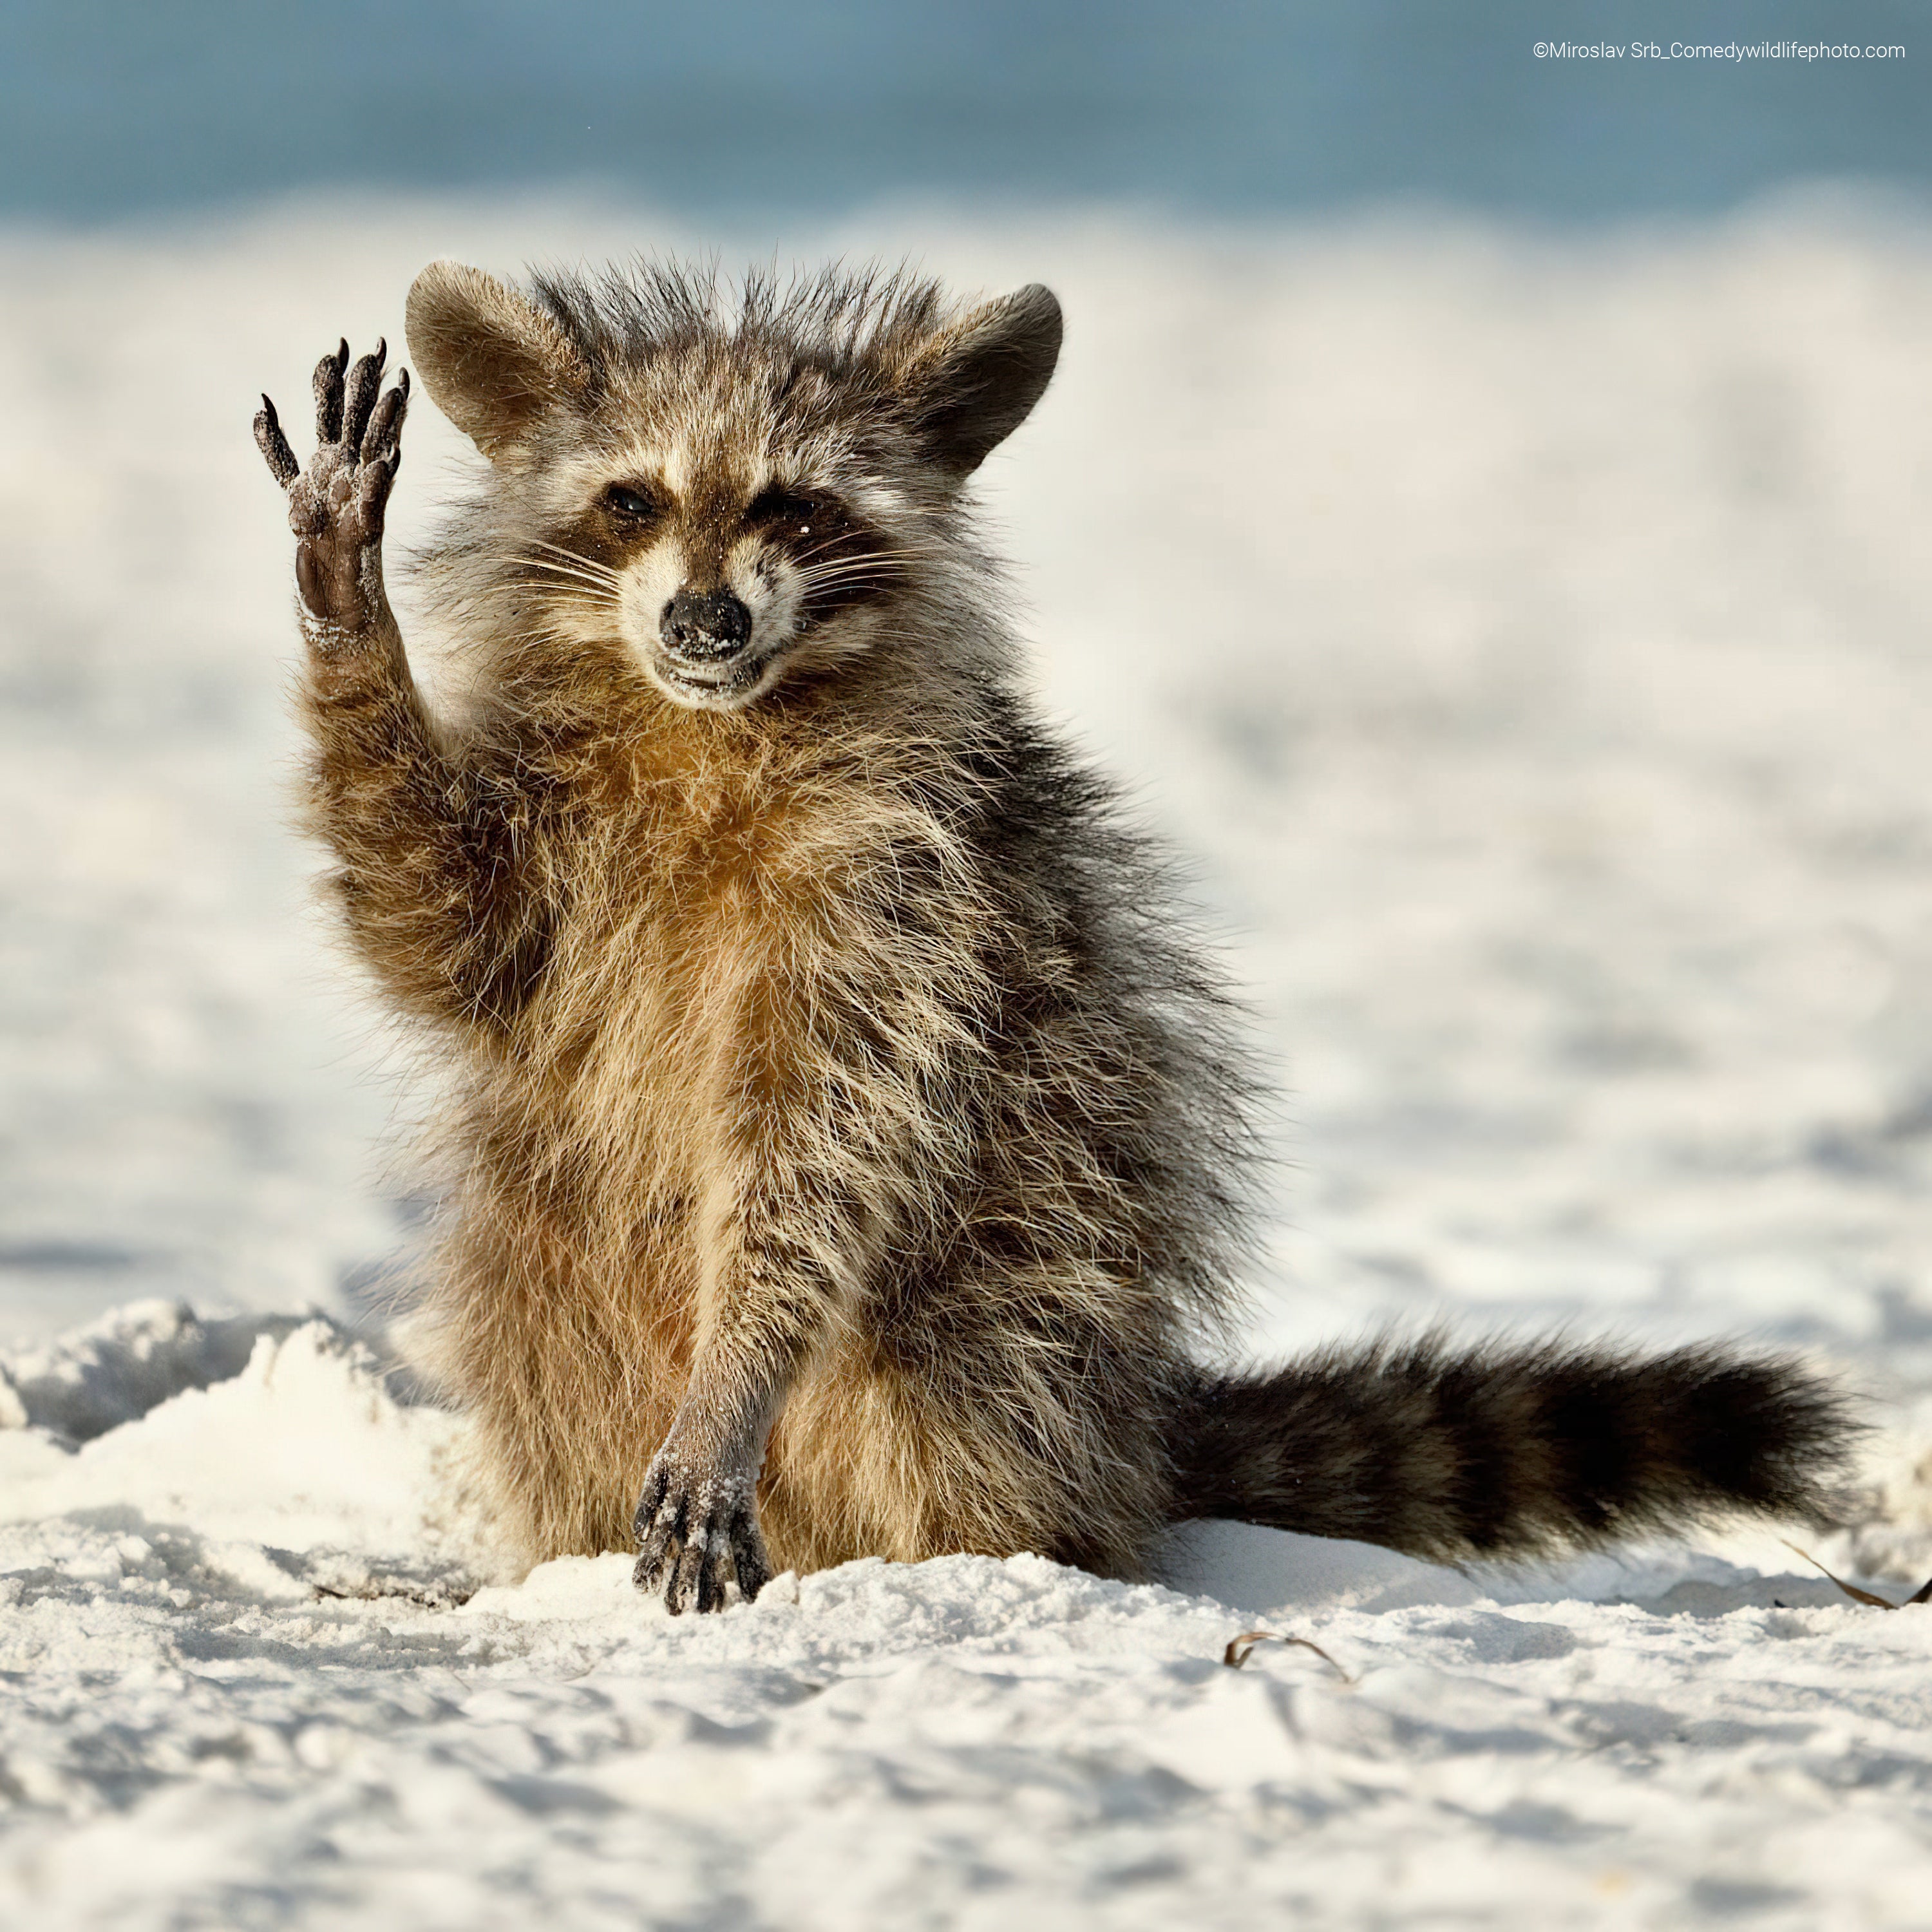 A scraggly looking raccoon appears to wave at the camera. (Photo: ©  Miroslav Srb / Comedywildlifephoto.com.)